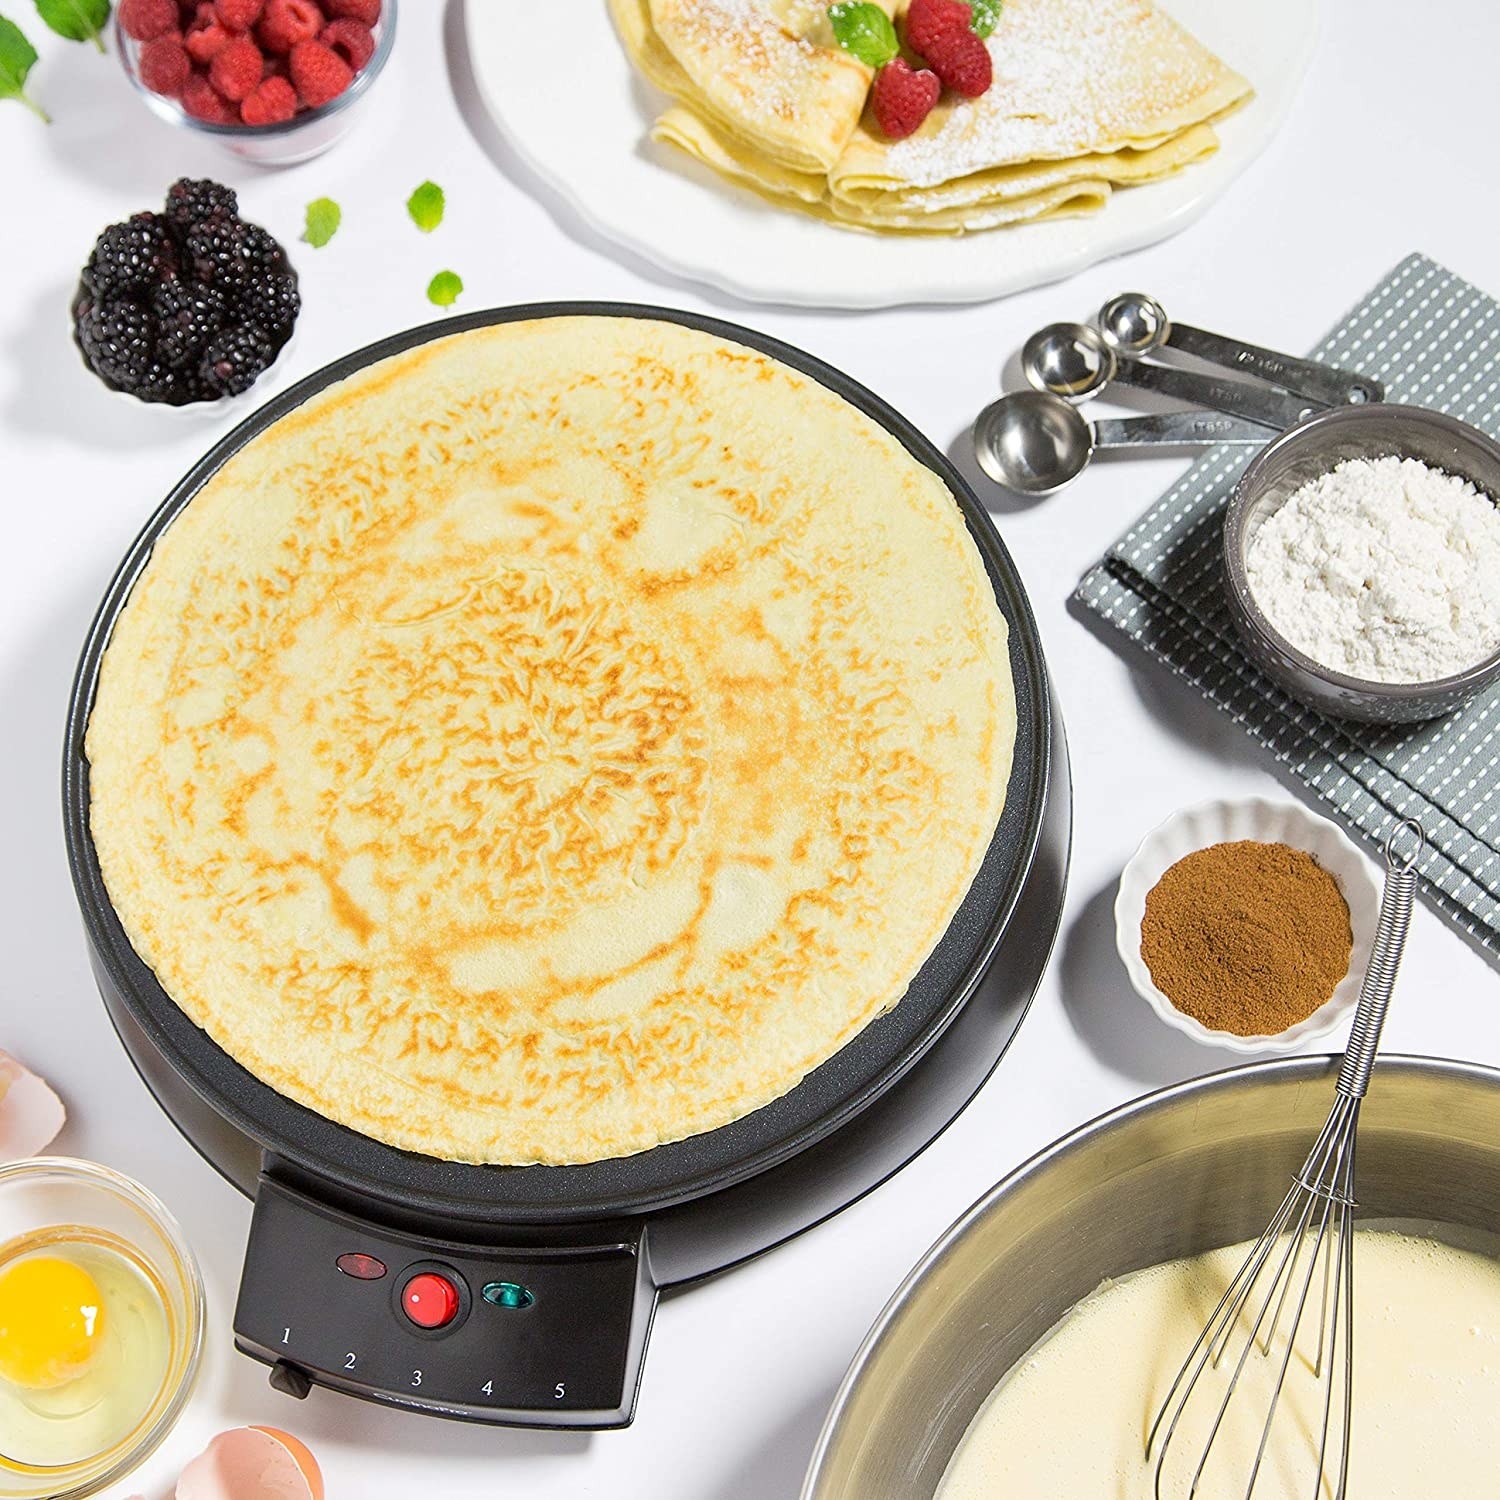 a flatlay of someone making a crepe on the flat-top crepe maker